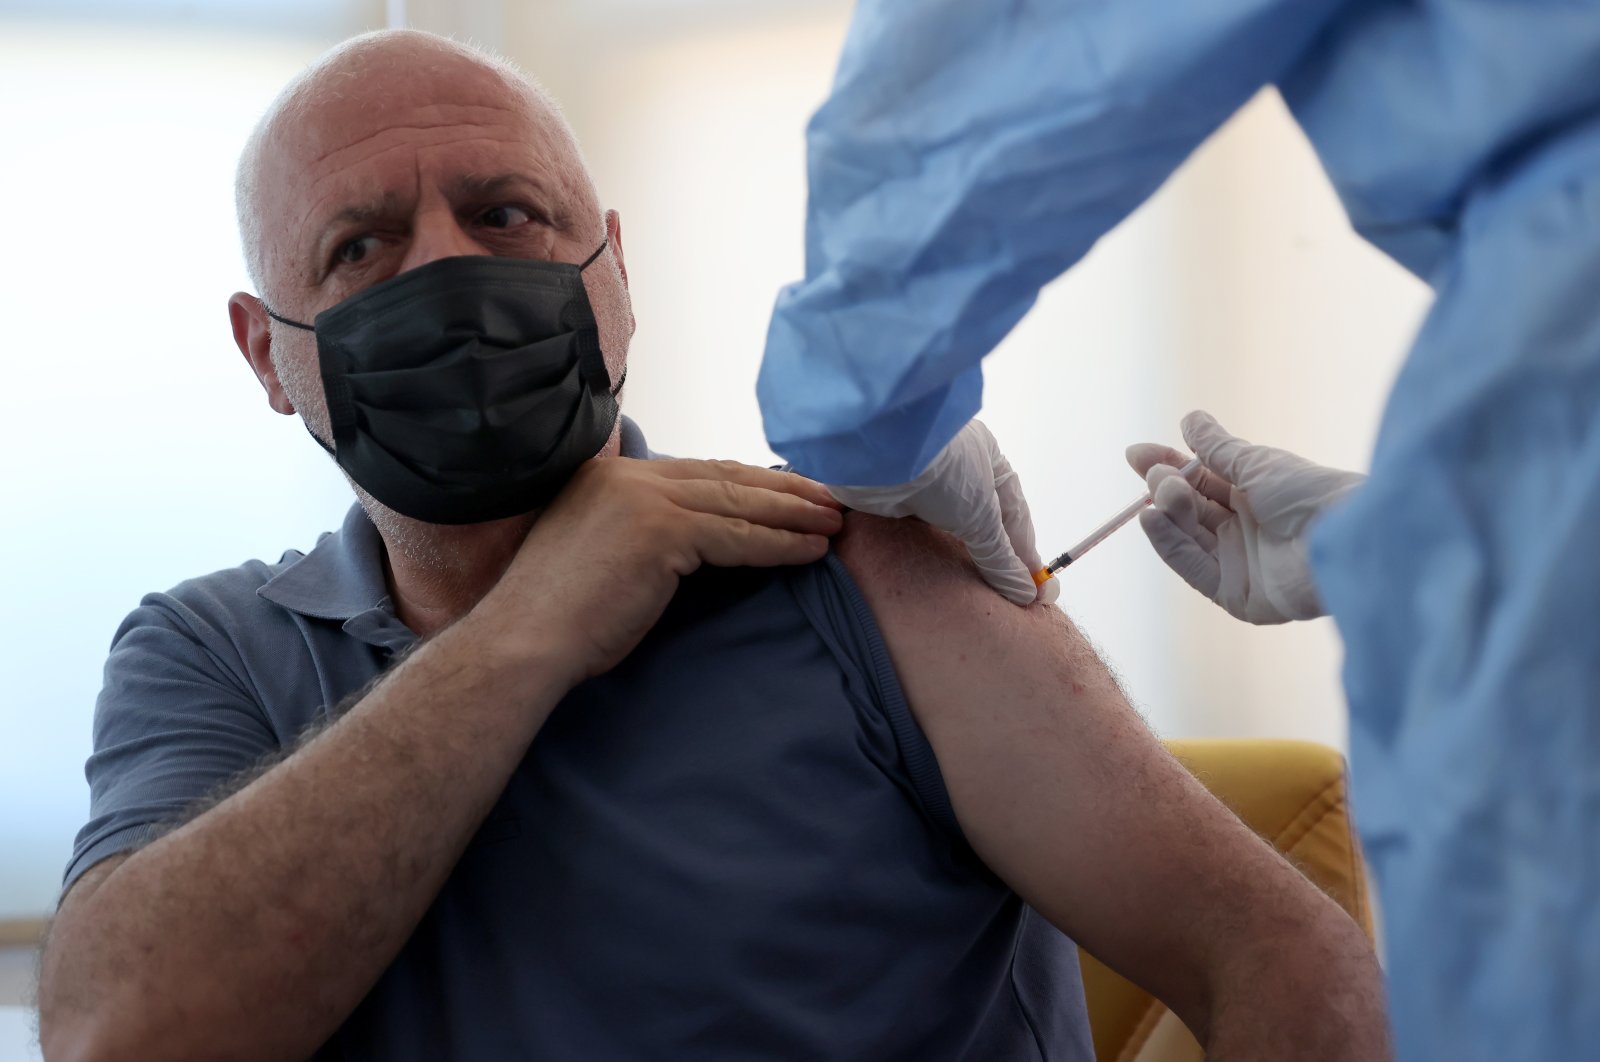 A man receives a dose of a COVID-19 vaccine at a vaccination center in Istanbul, Turkey, June 30, 2021. (AA Photo)